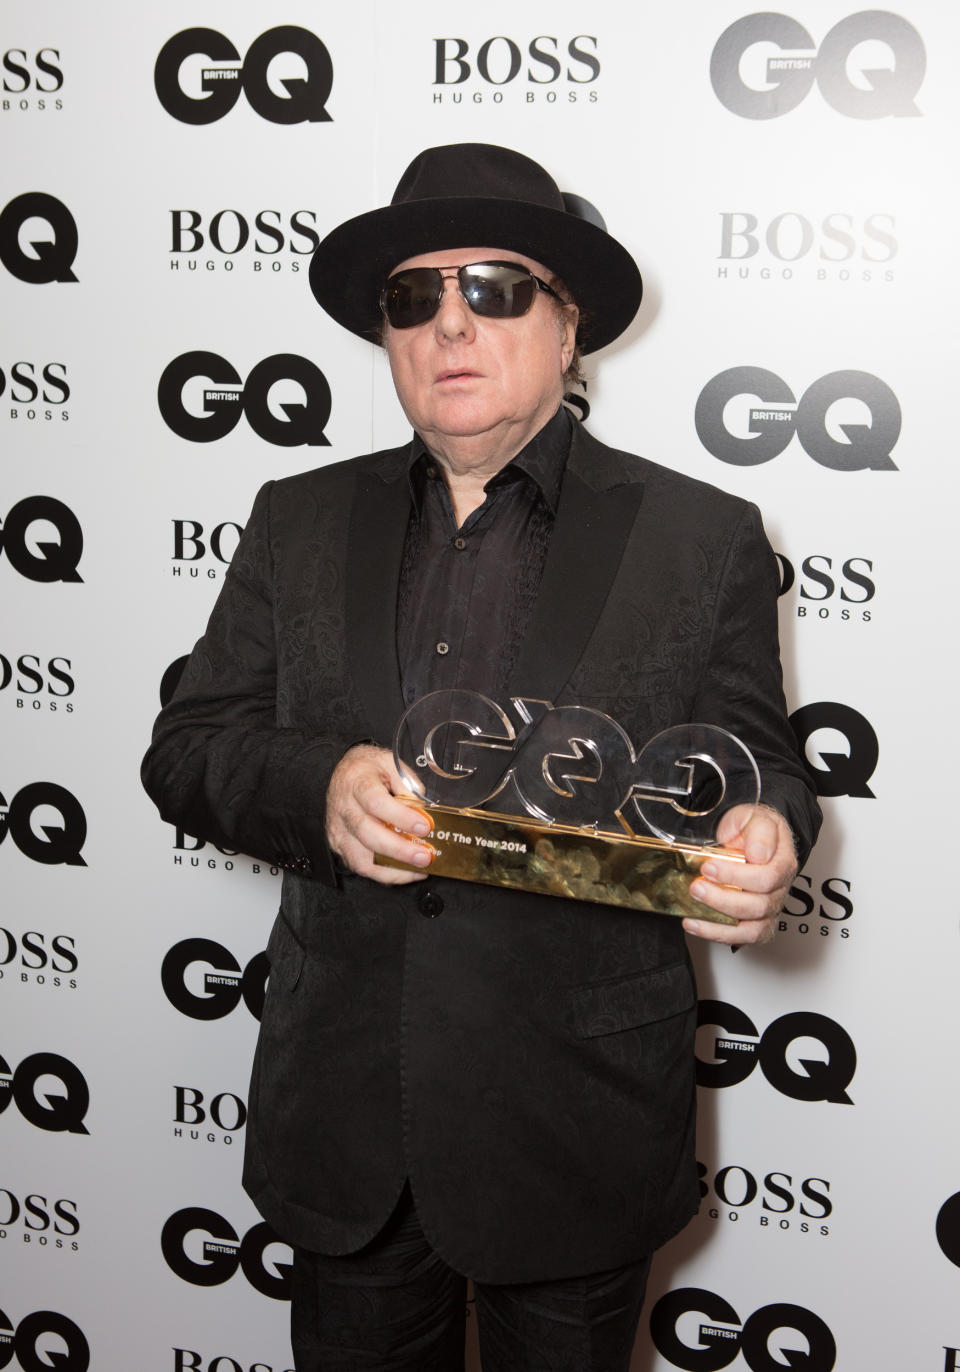 Van Morrison after winning the Legend award at the GQ Men of the Year Awards at the Royal Opera House, London.